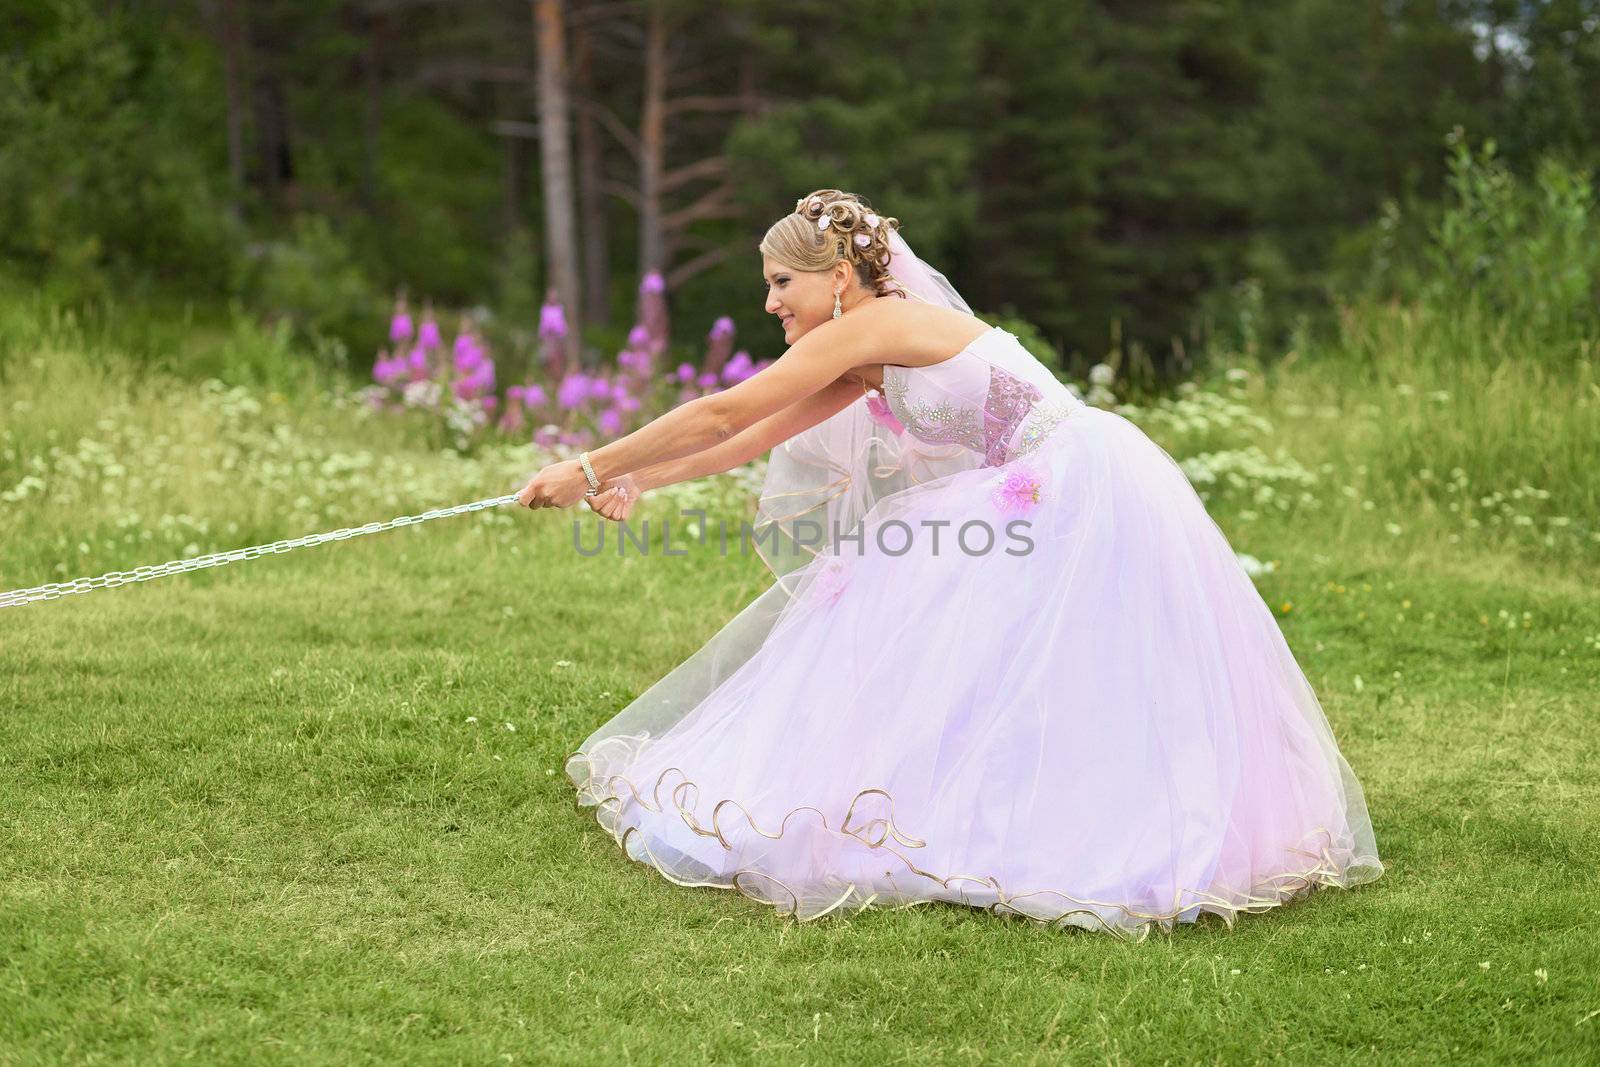 Funny bride pulls the chain - outdoors scene 